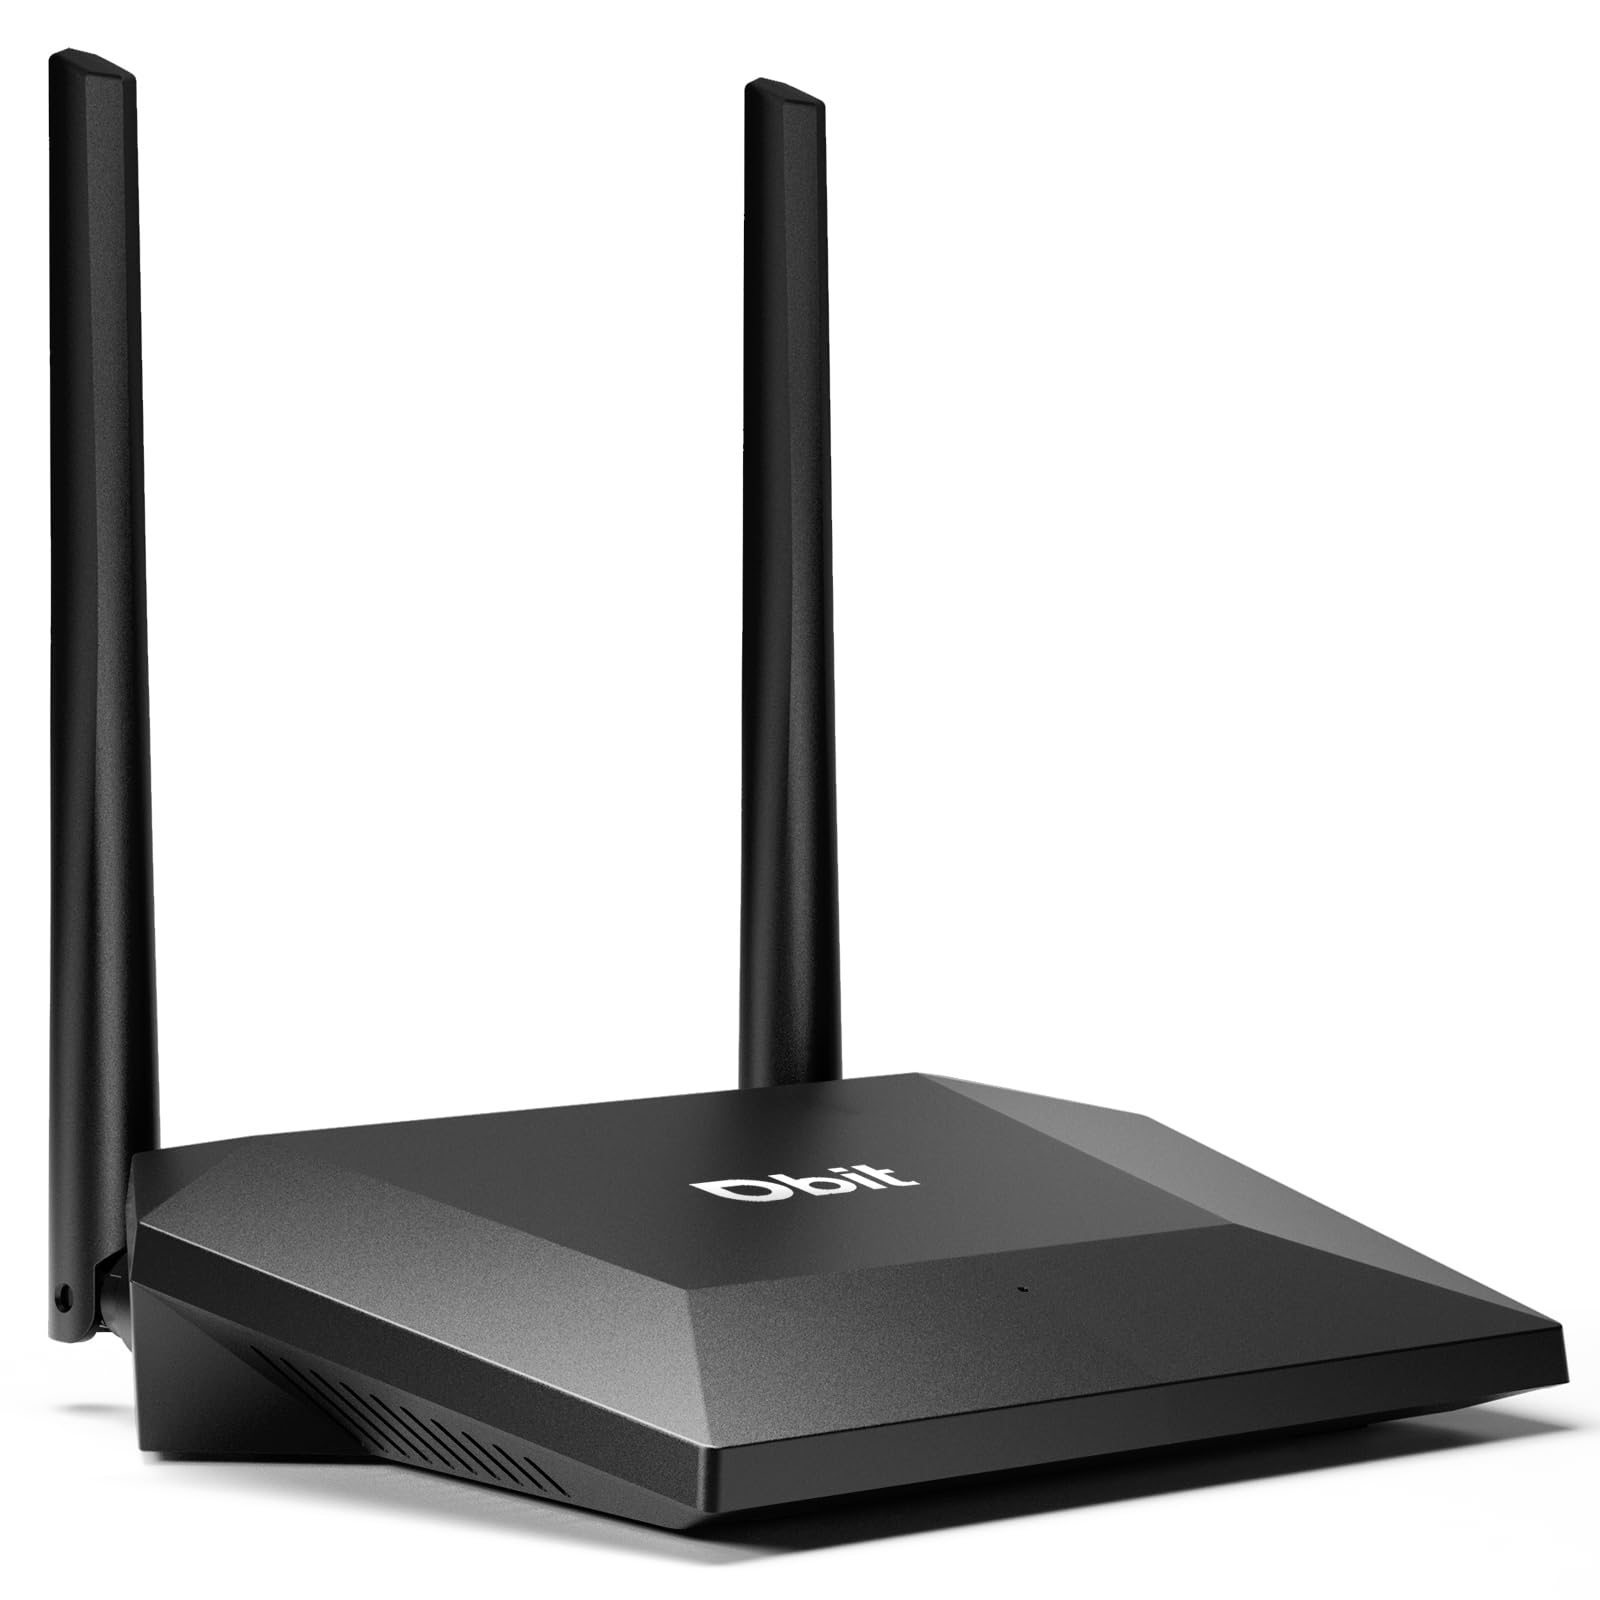 Research and purchase a newer, more powerful router
Ensure the new router is compatible with your internet service provider